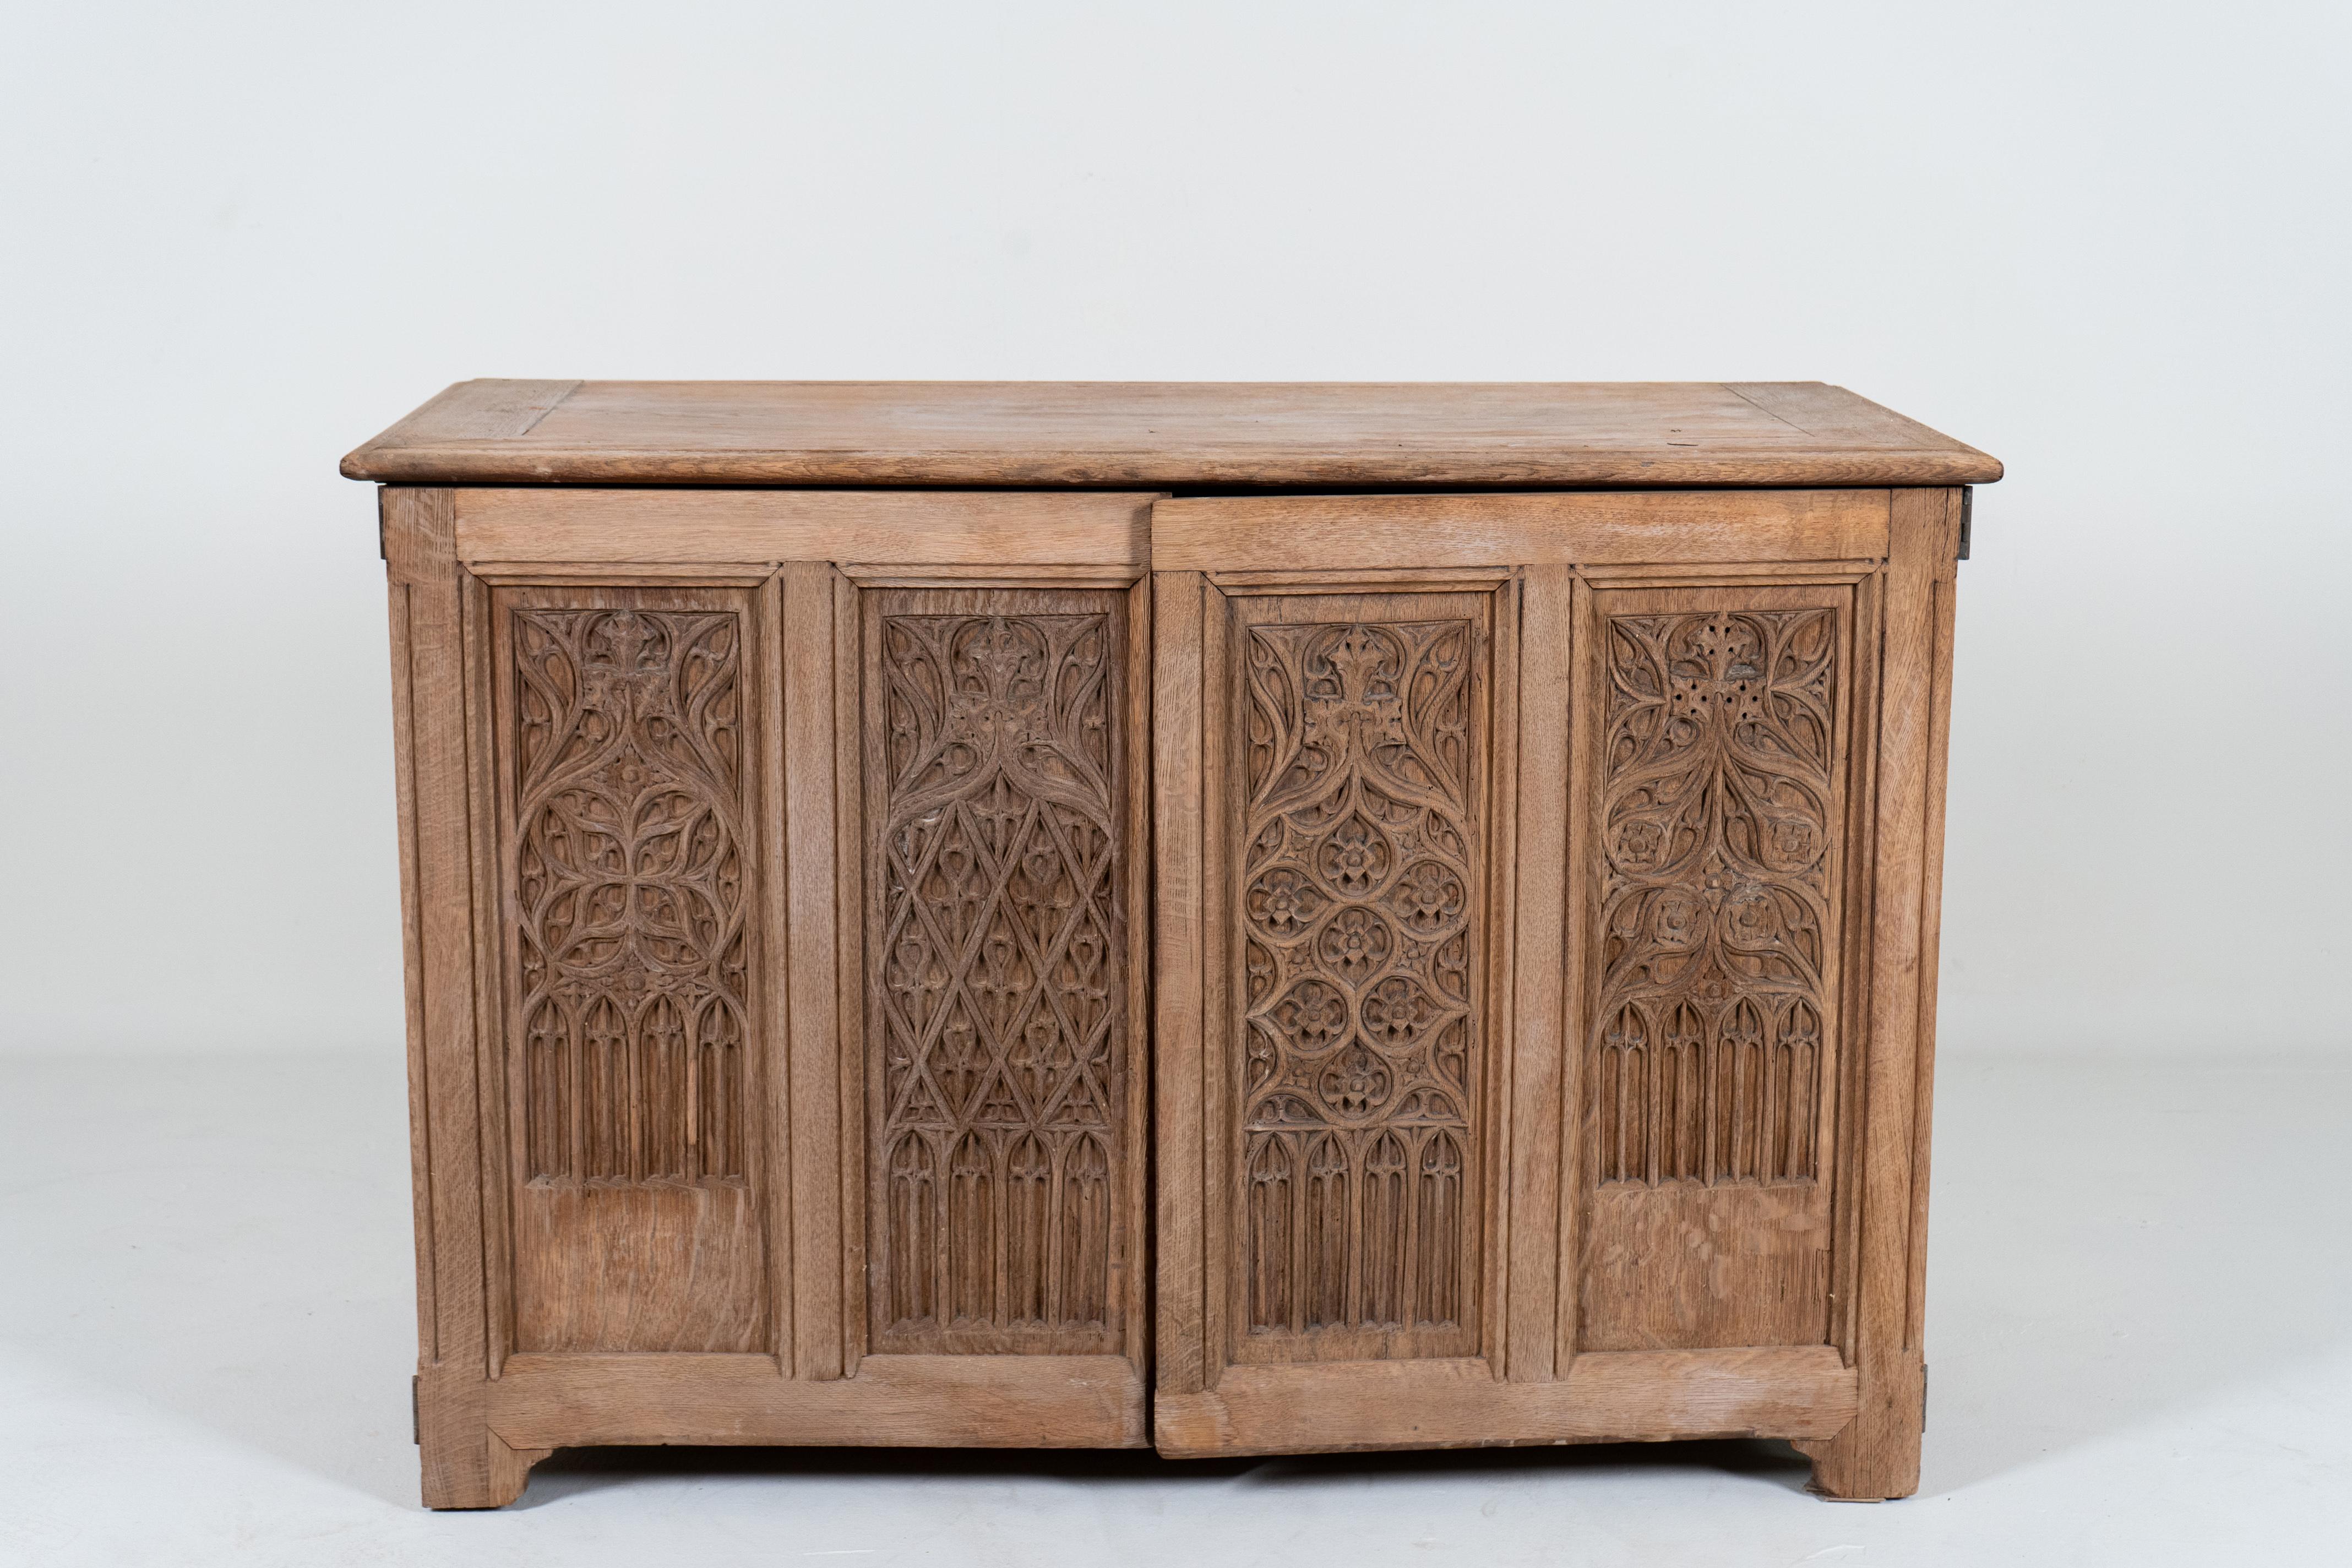 This remarkable Gothic-style chest is intricately carved in stone-inspired tracery and solidly built.   The Gothic Revival style was popular in Europe in the second half of the 19th Century.   As Europe modernized (especially France and Britain)  a